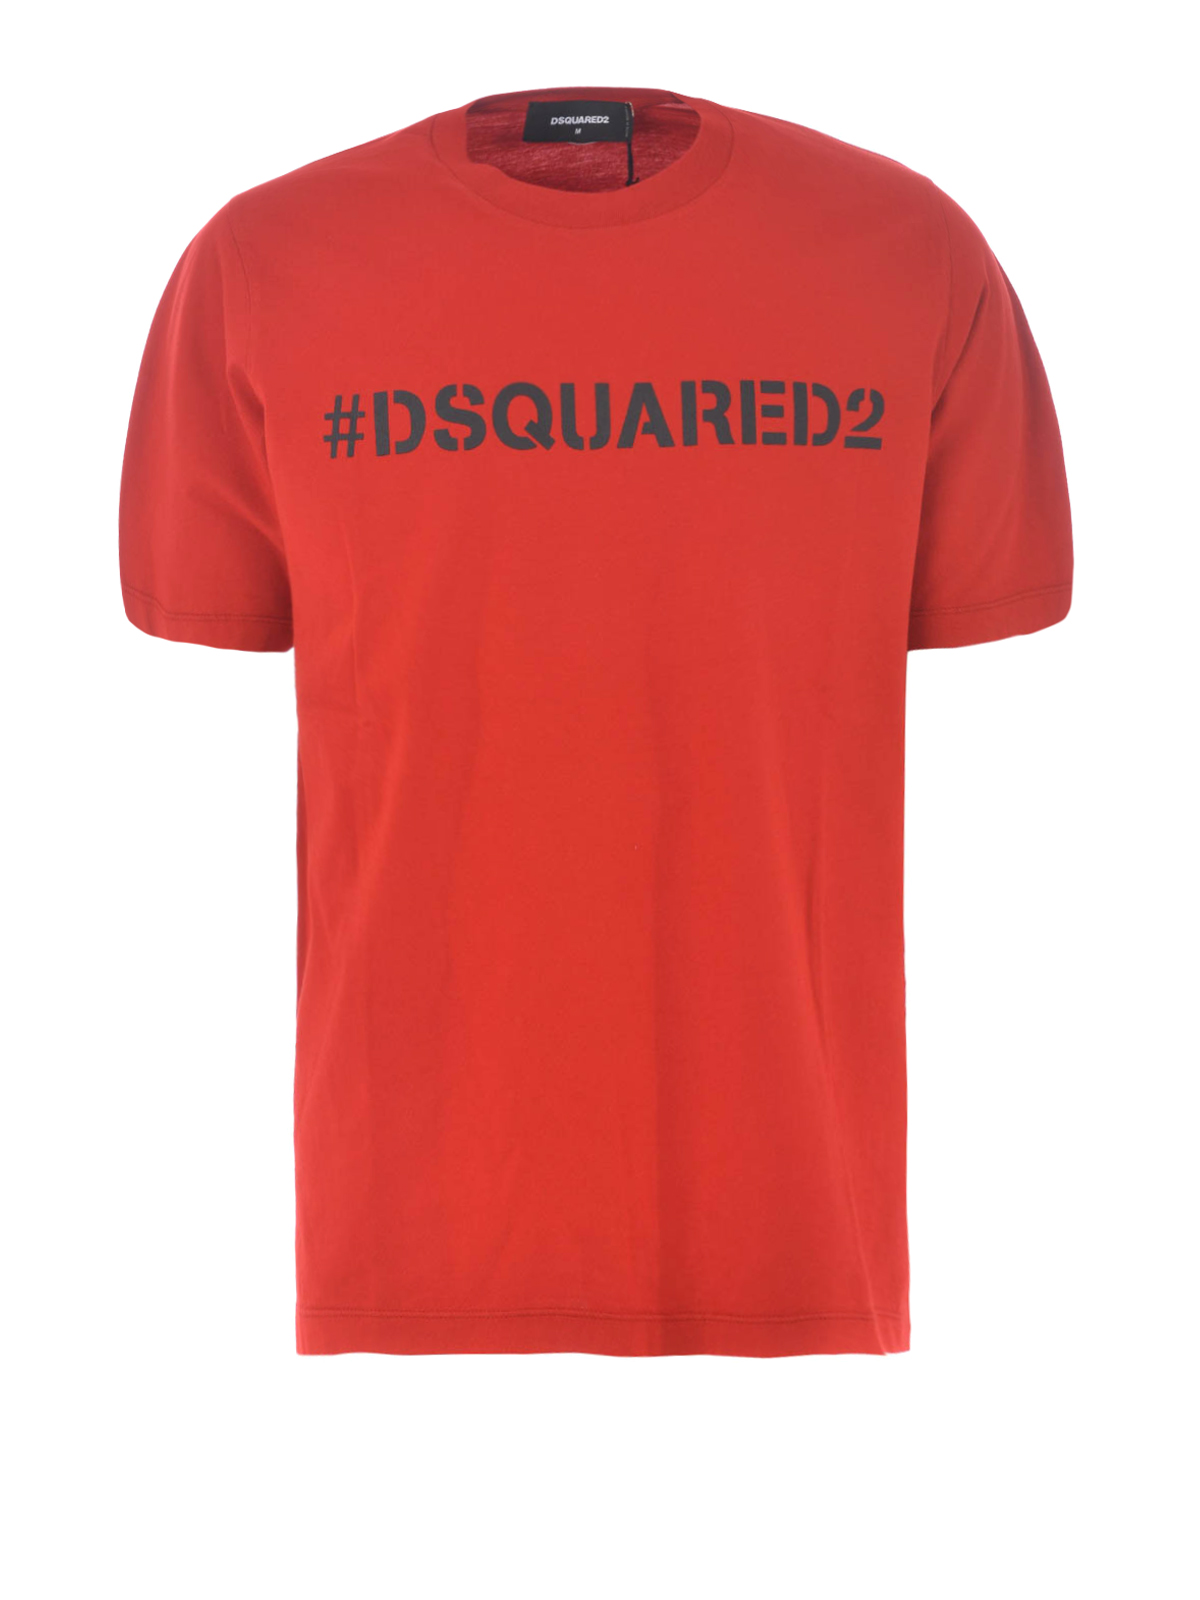 dsquared2 shirt red